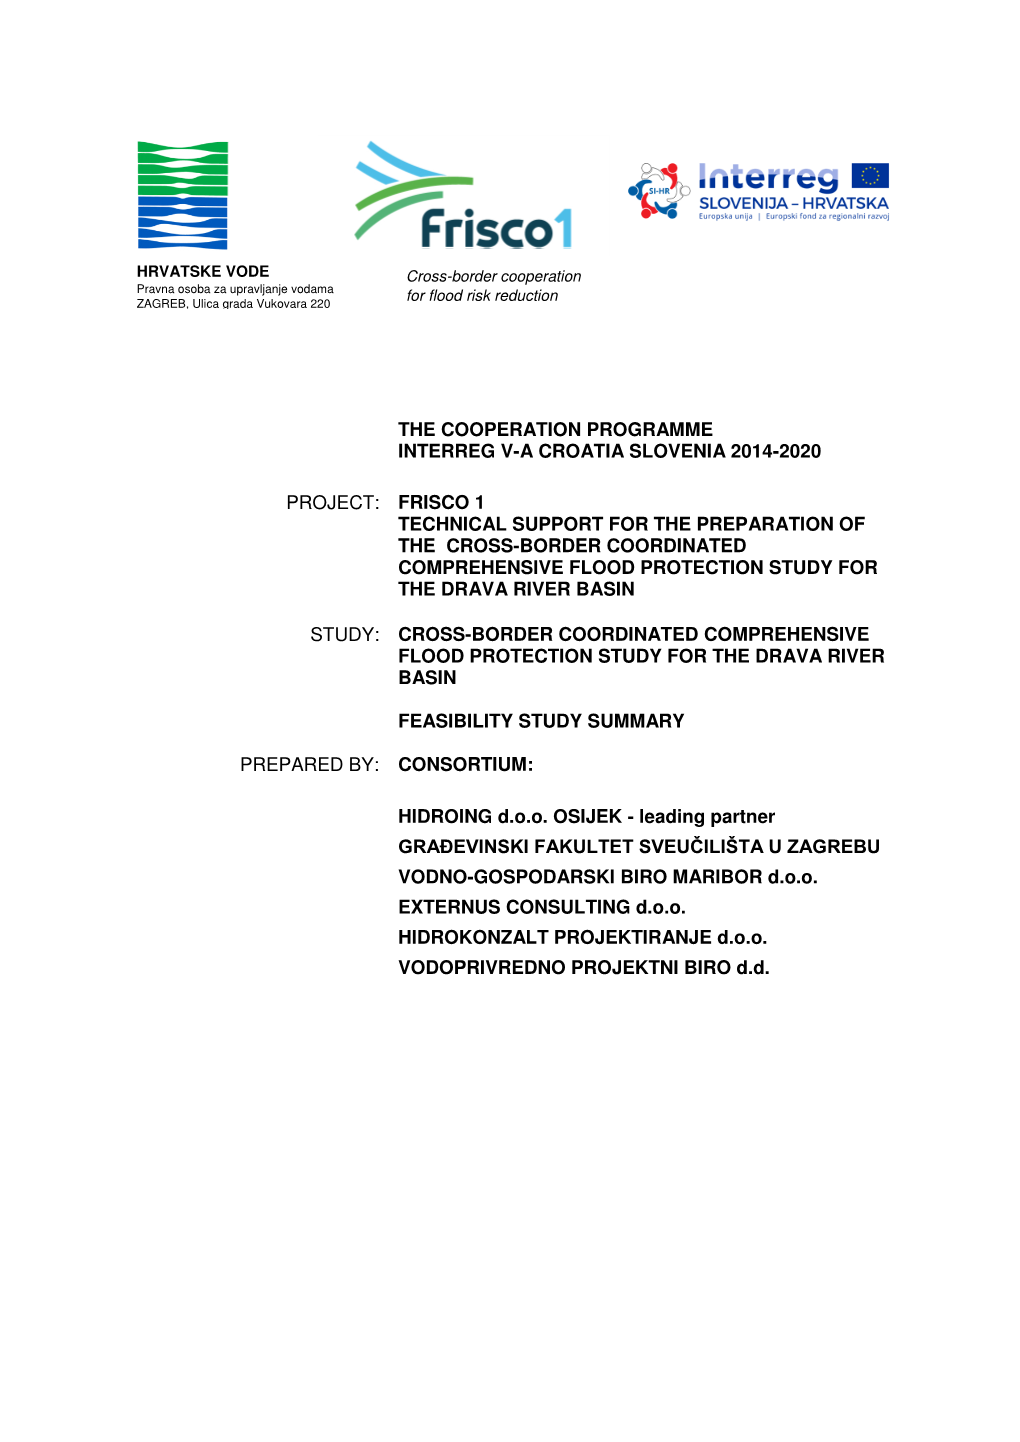 Frisco 1 Technical Support for the Preparation of the Cross-Border Coordinated Comprehensive Flood Protection Study for the Drava River Basin